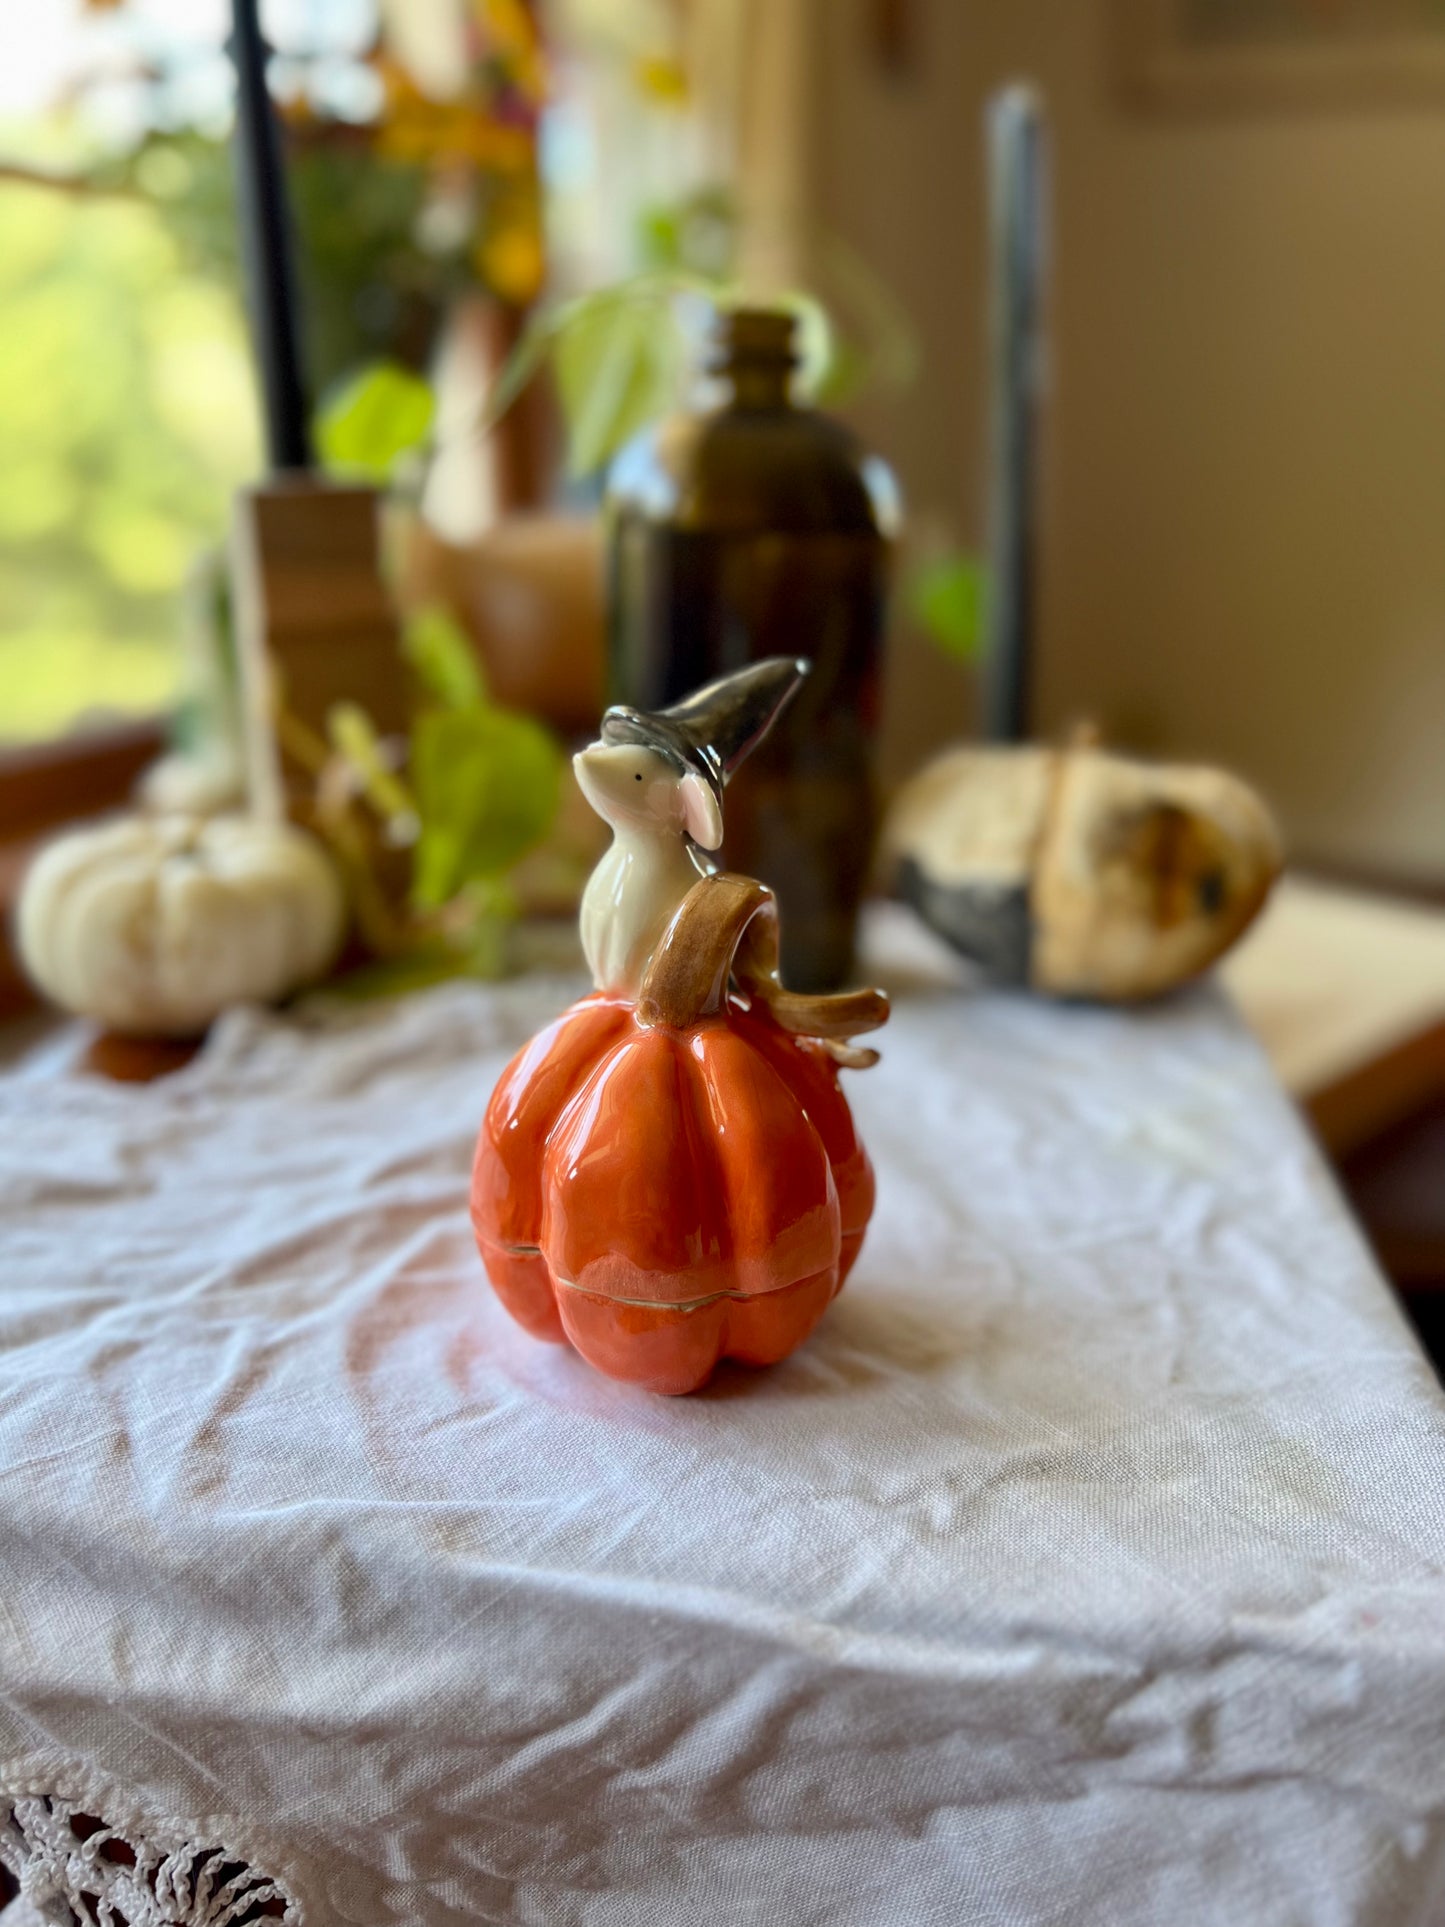 Mouse and Pumpkin Small jar